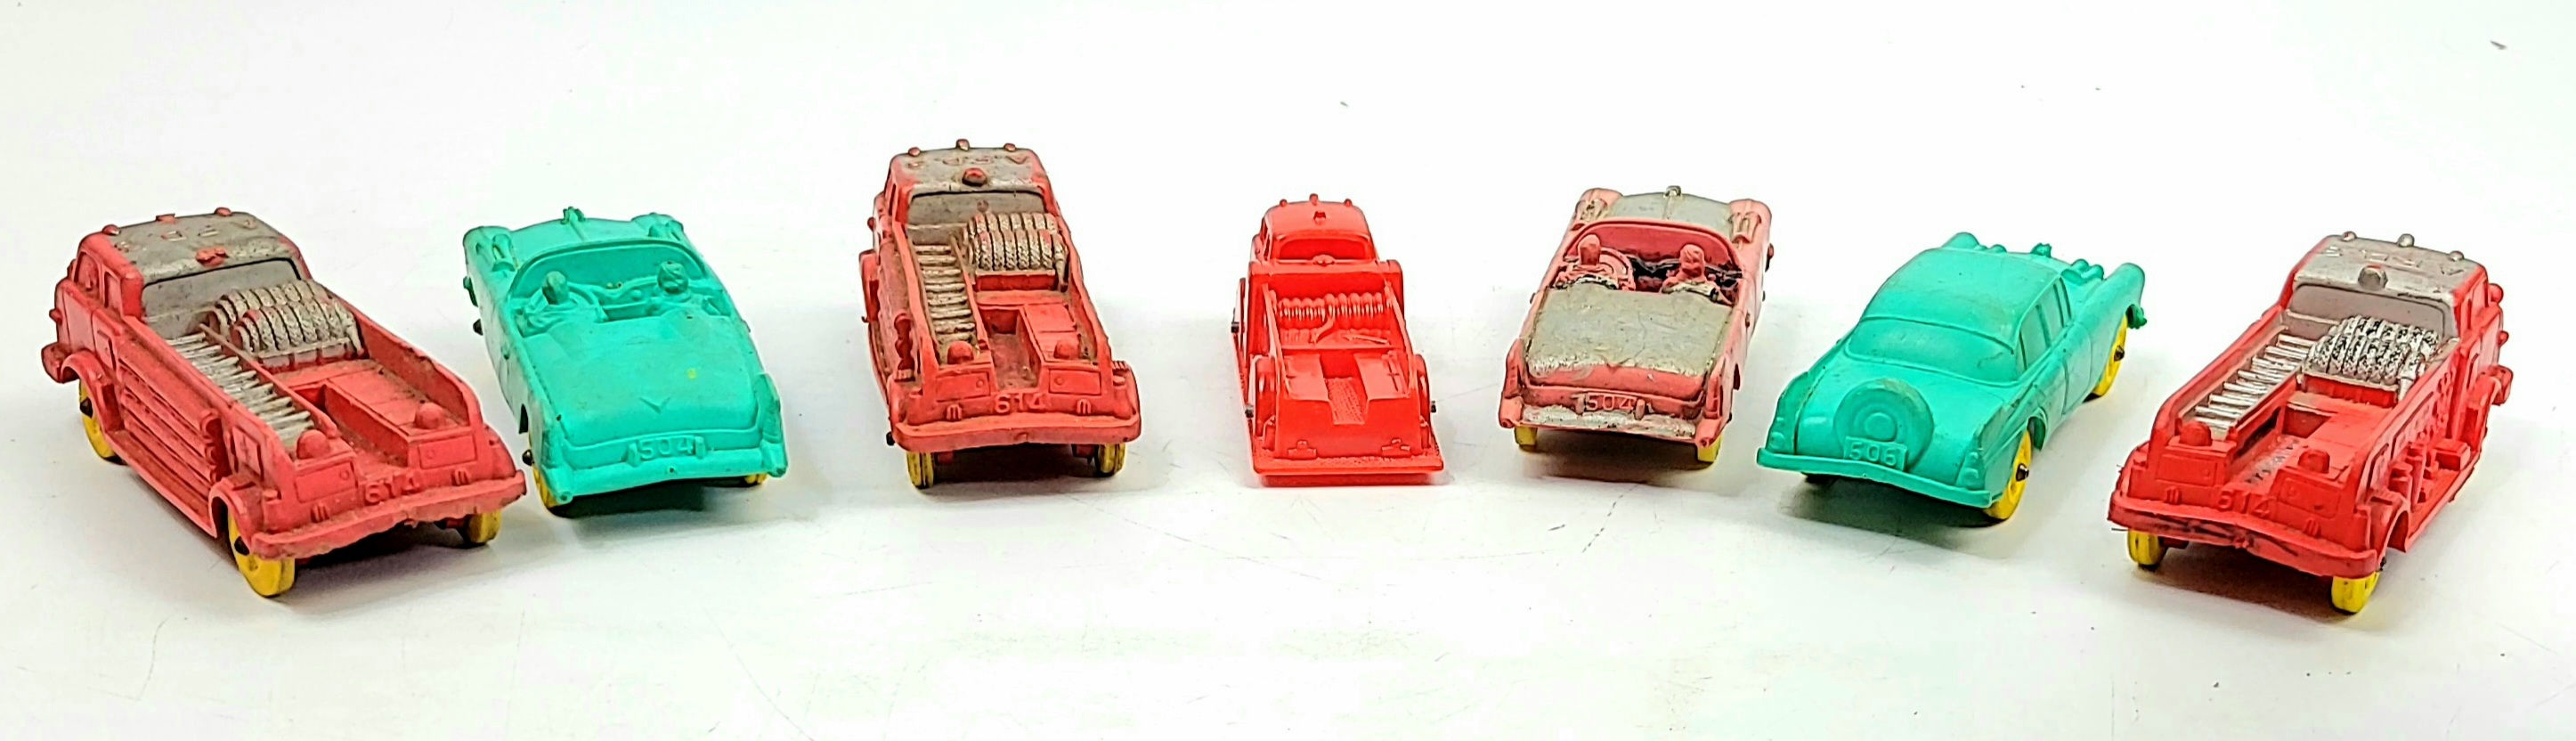 Vintage Auburn Rubber Vehicle Toy Grouping